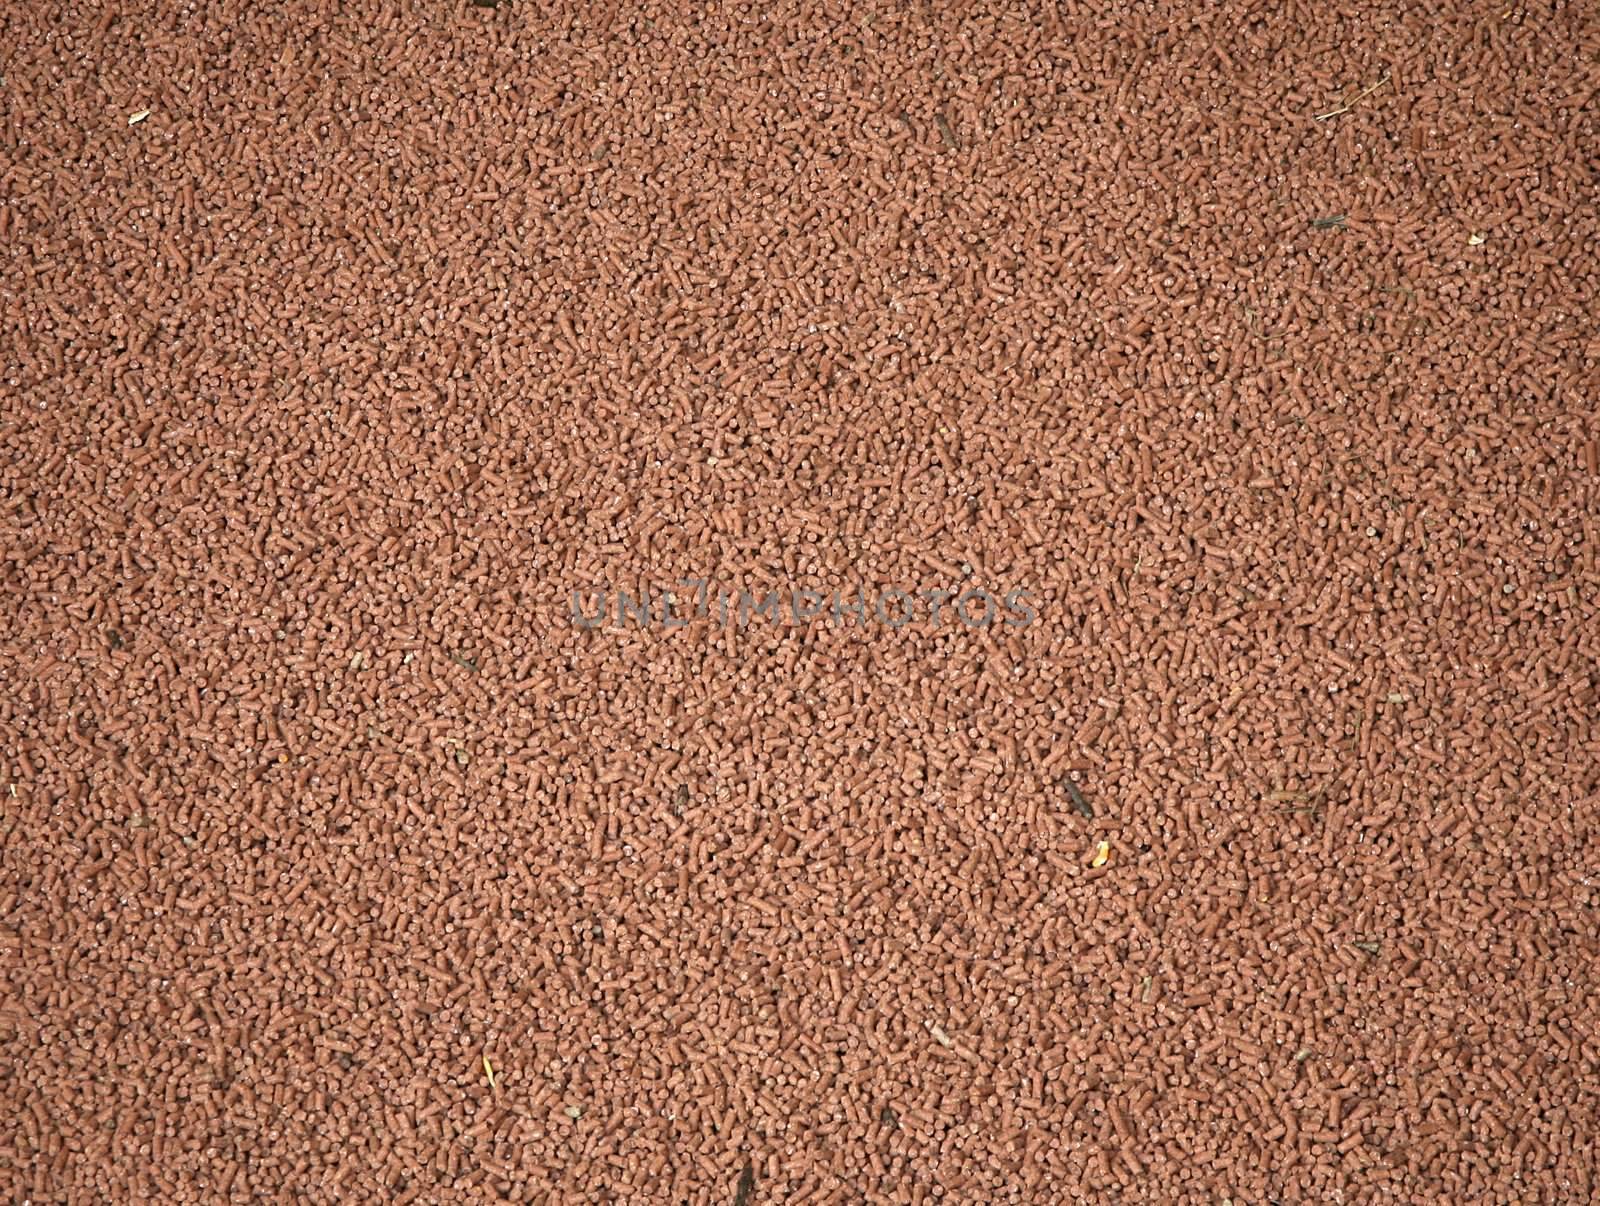 Background of food pellets used at a dairy to feed the cows